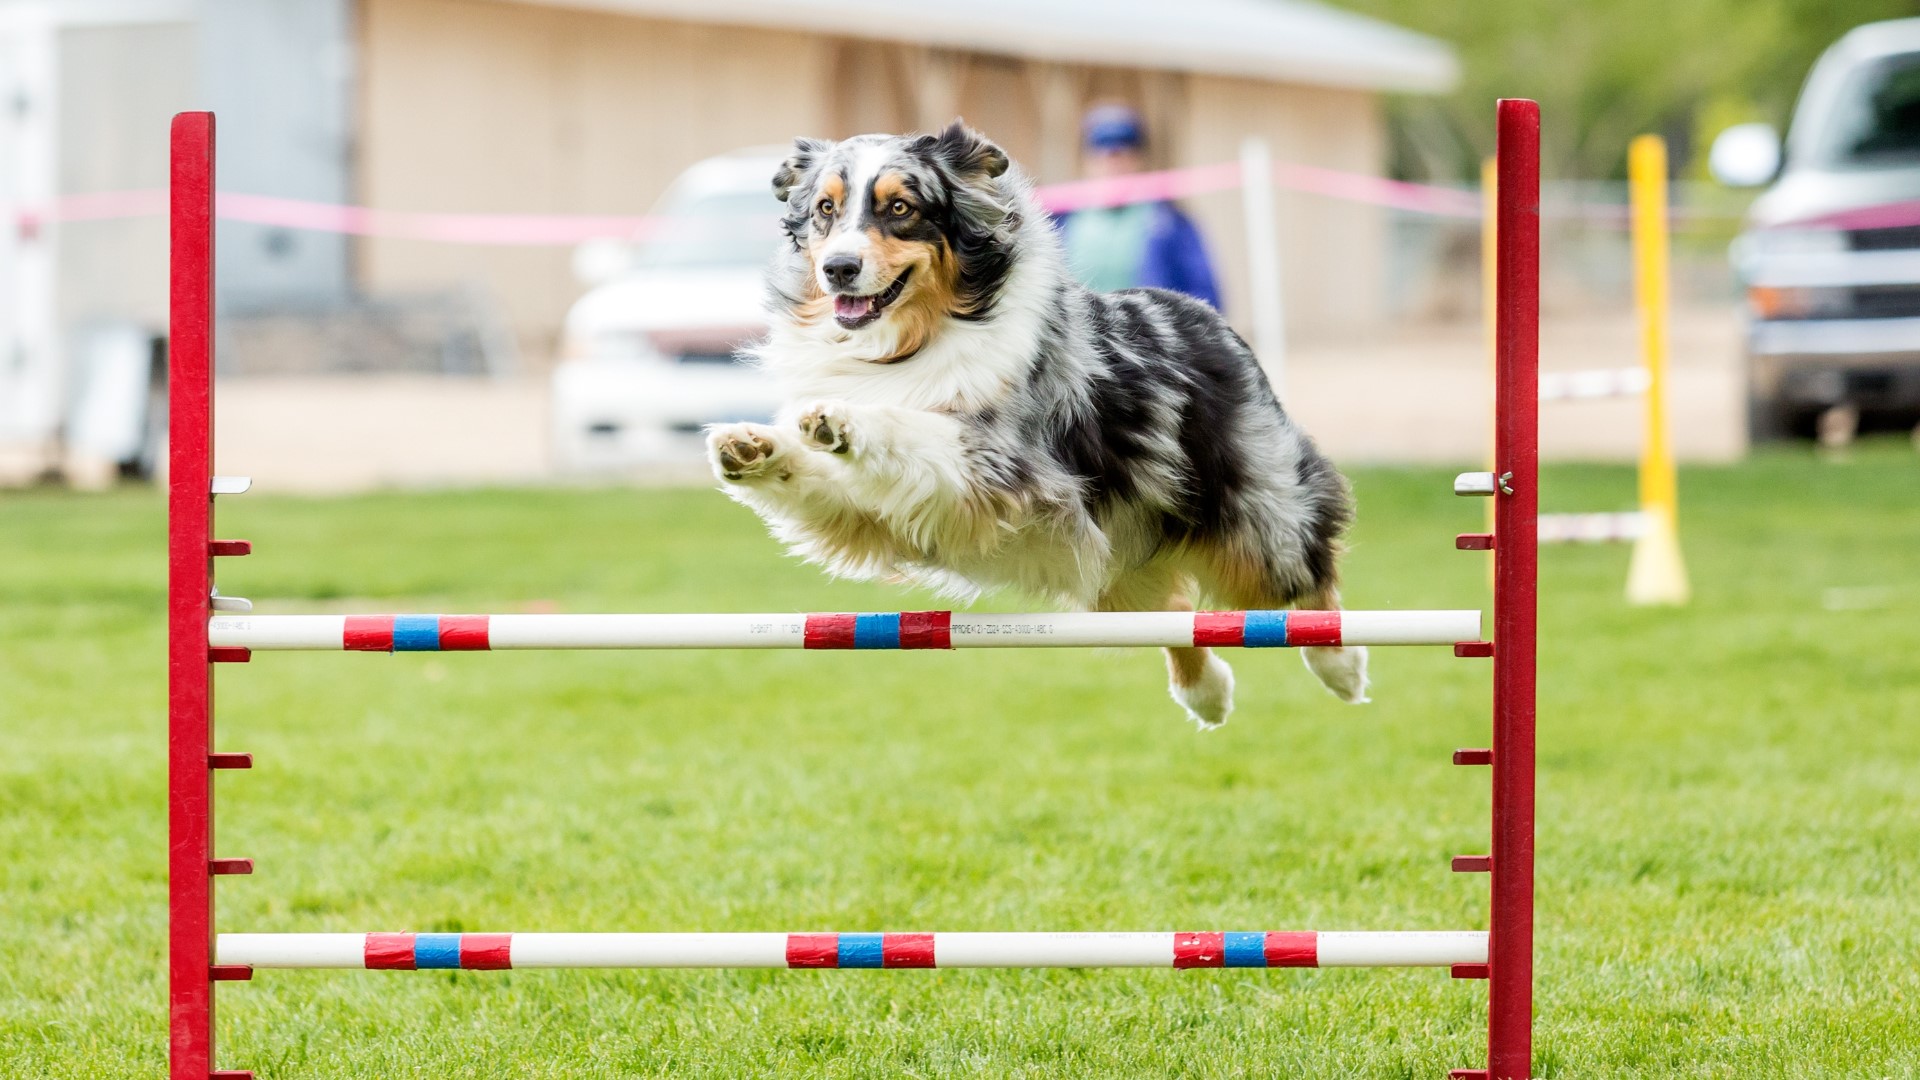 Sponsored by: PGC Parks & Recreation. 'The Fast & The Furriest Doggie Olympics' in Prince George's County this Saturday, Sept. 16th at Berwyn Heights Community Ctr.